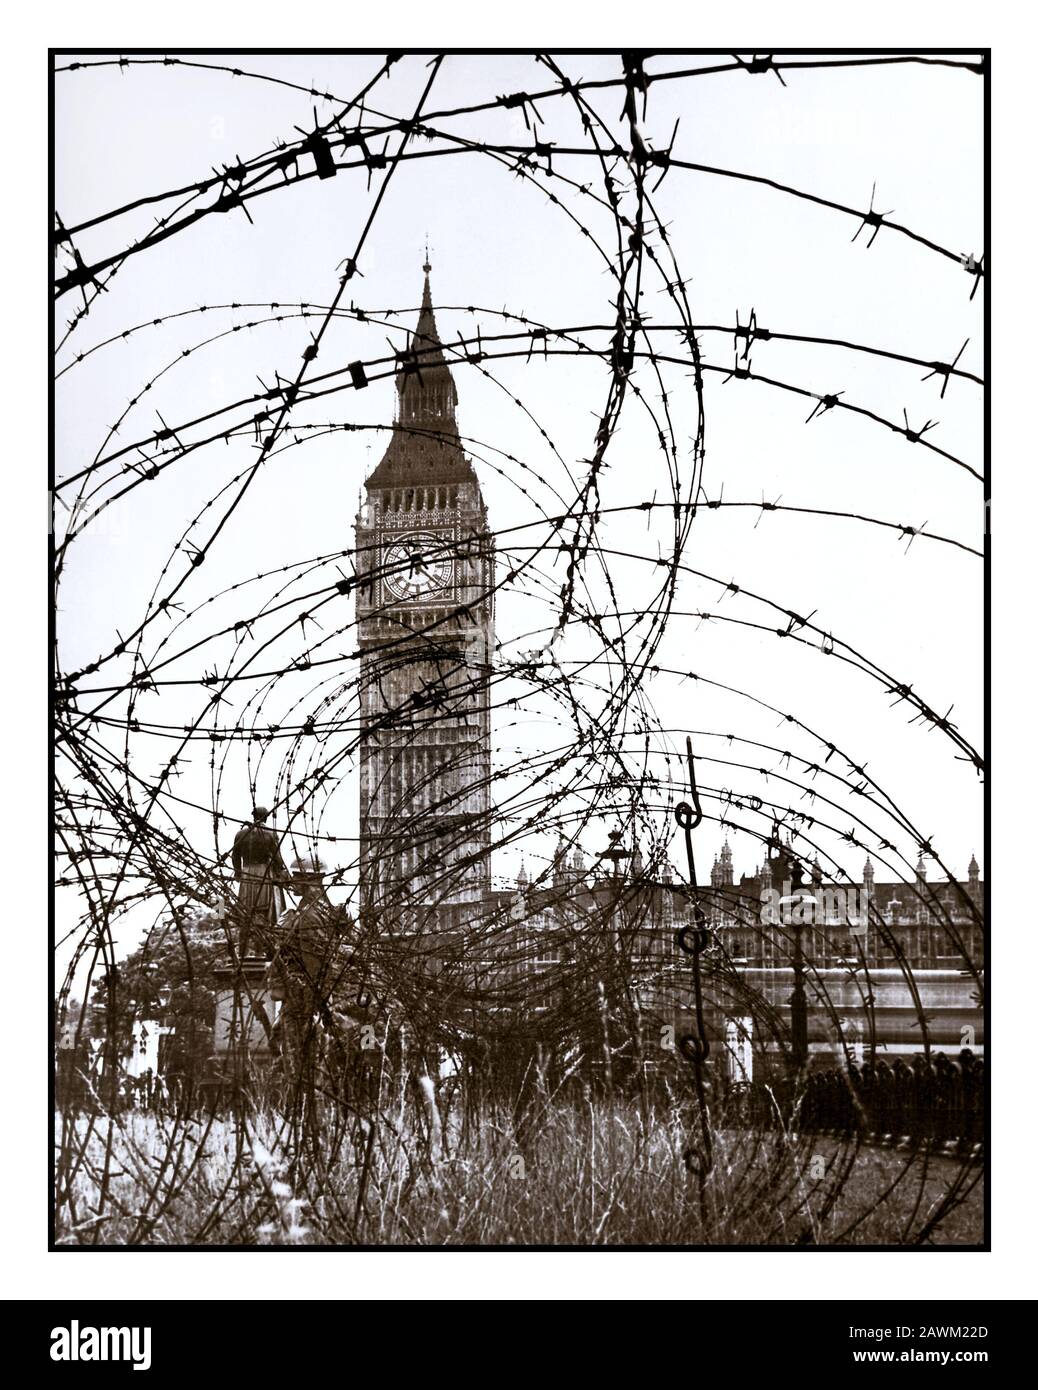 WW2 1940's CASE OF PARLIAMENT Barbed Wire Fencing Protection Parliament Square Londra UK Foto Stock